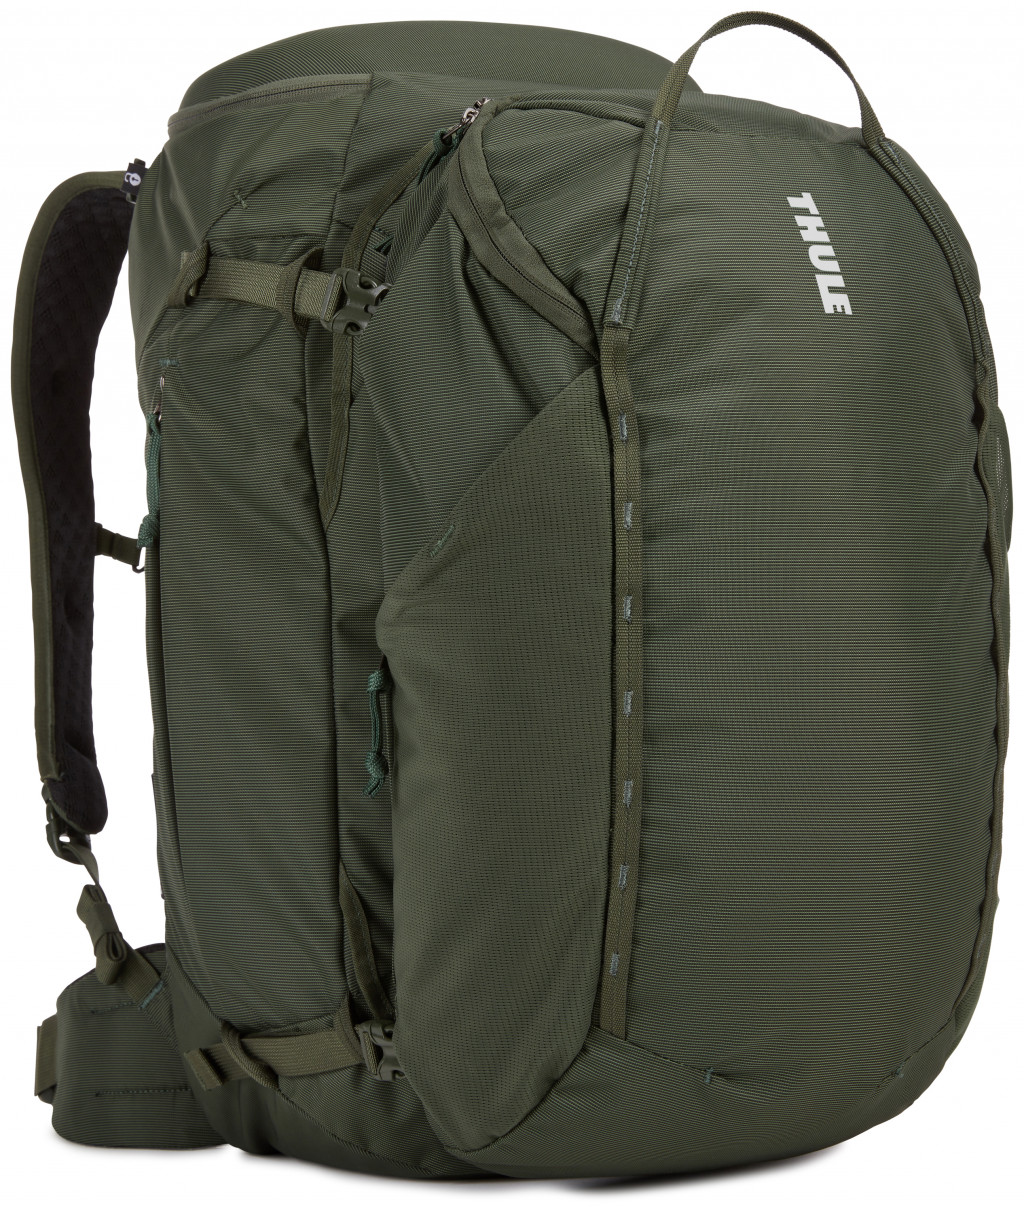 Thule | Fits up to size  " | 60L Uni Backpacking pack | TLPM-160 Landmark | Backpack | Dark Forest | "